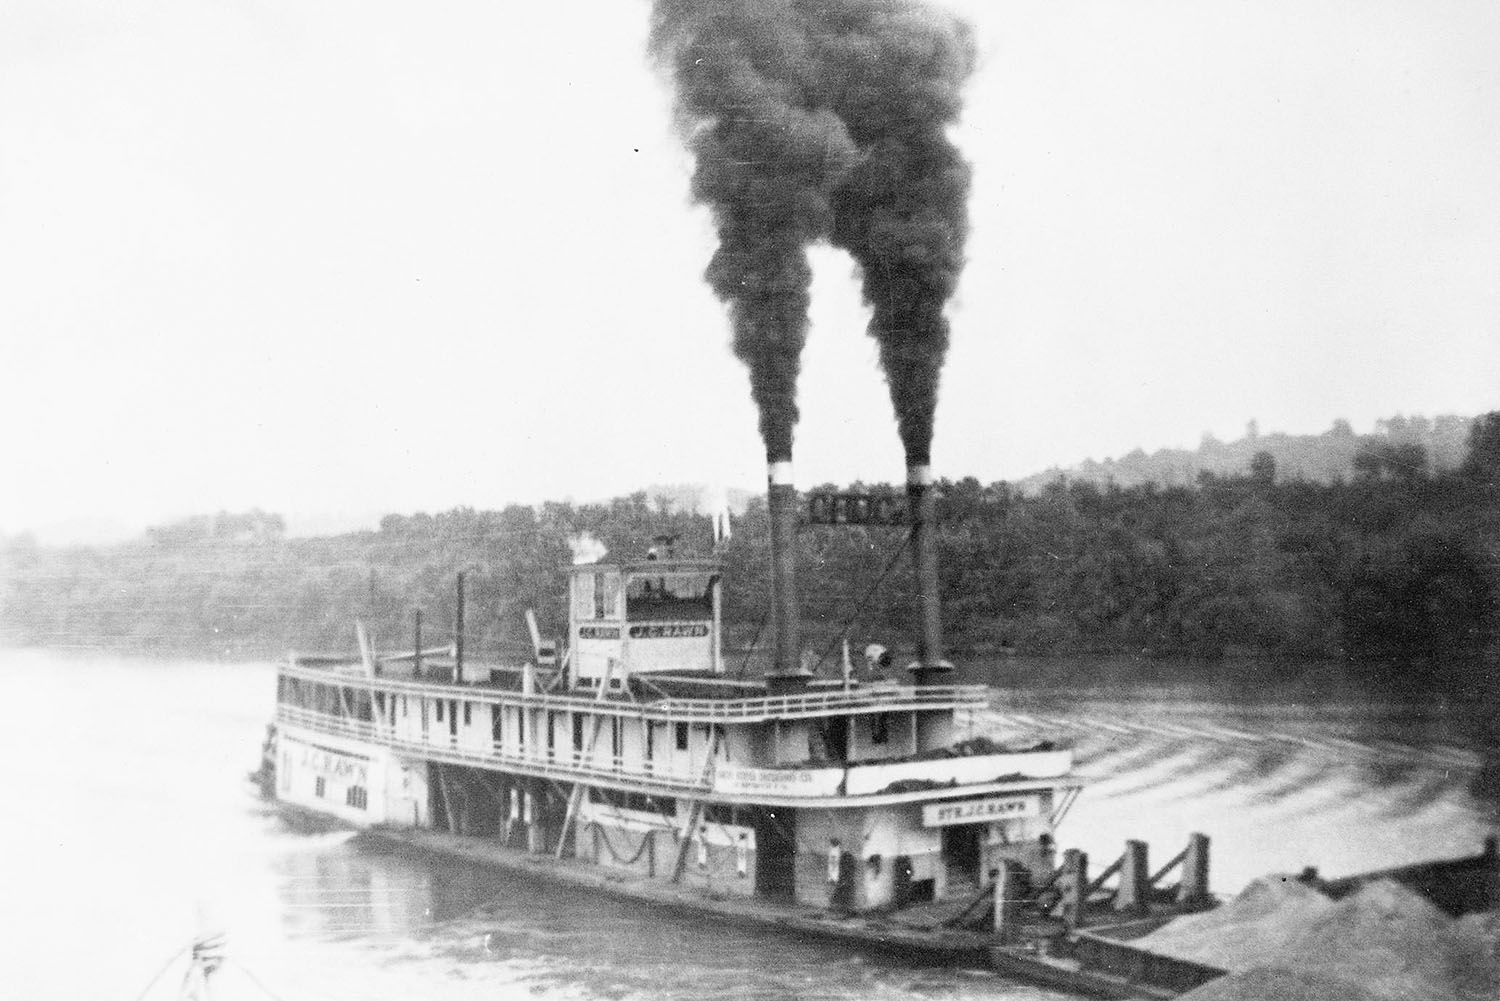 Str. J.C. Rawn in service for the Ohio River Dredging Company. (Author’s collection)